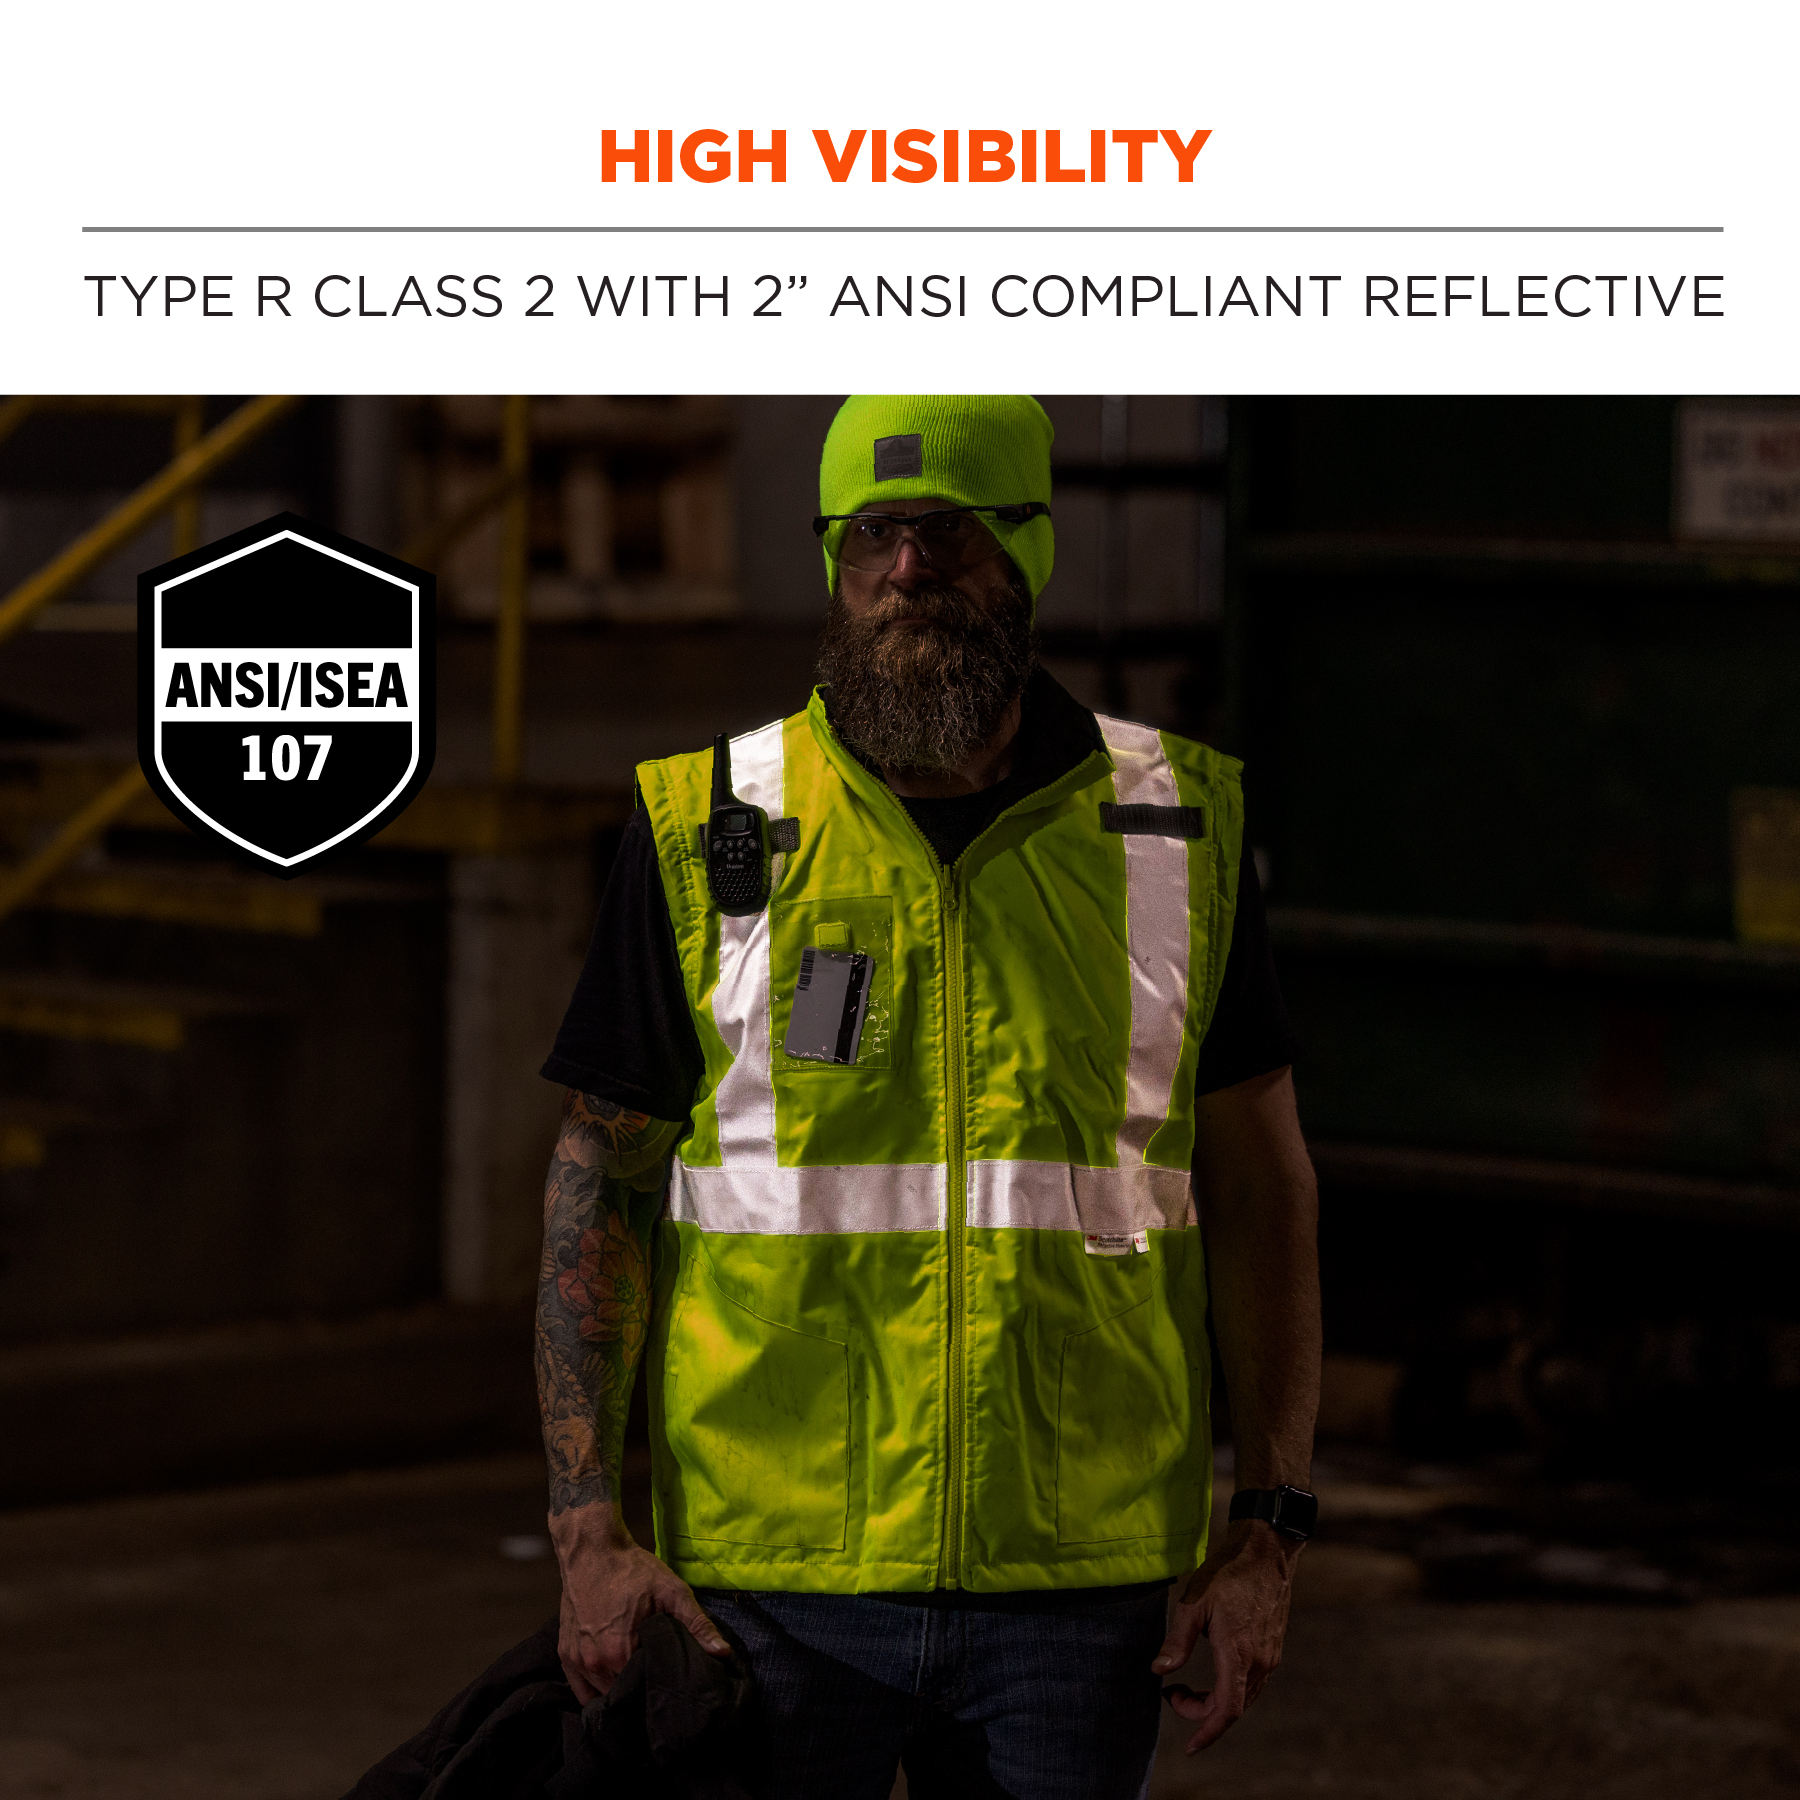 3M™ Recreational High-Visibility Reflective Safety Vest, One Size Fits All,  Yellow